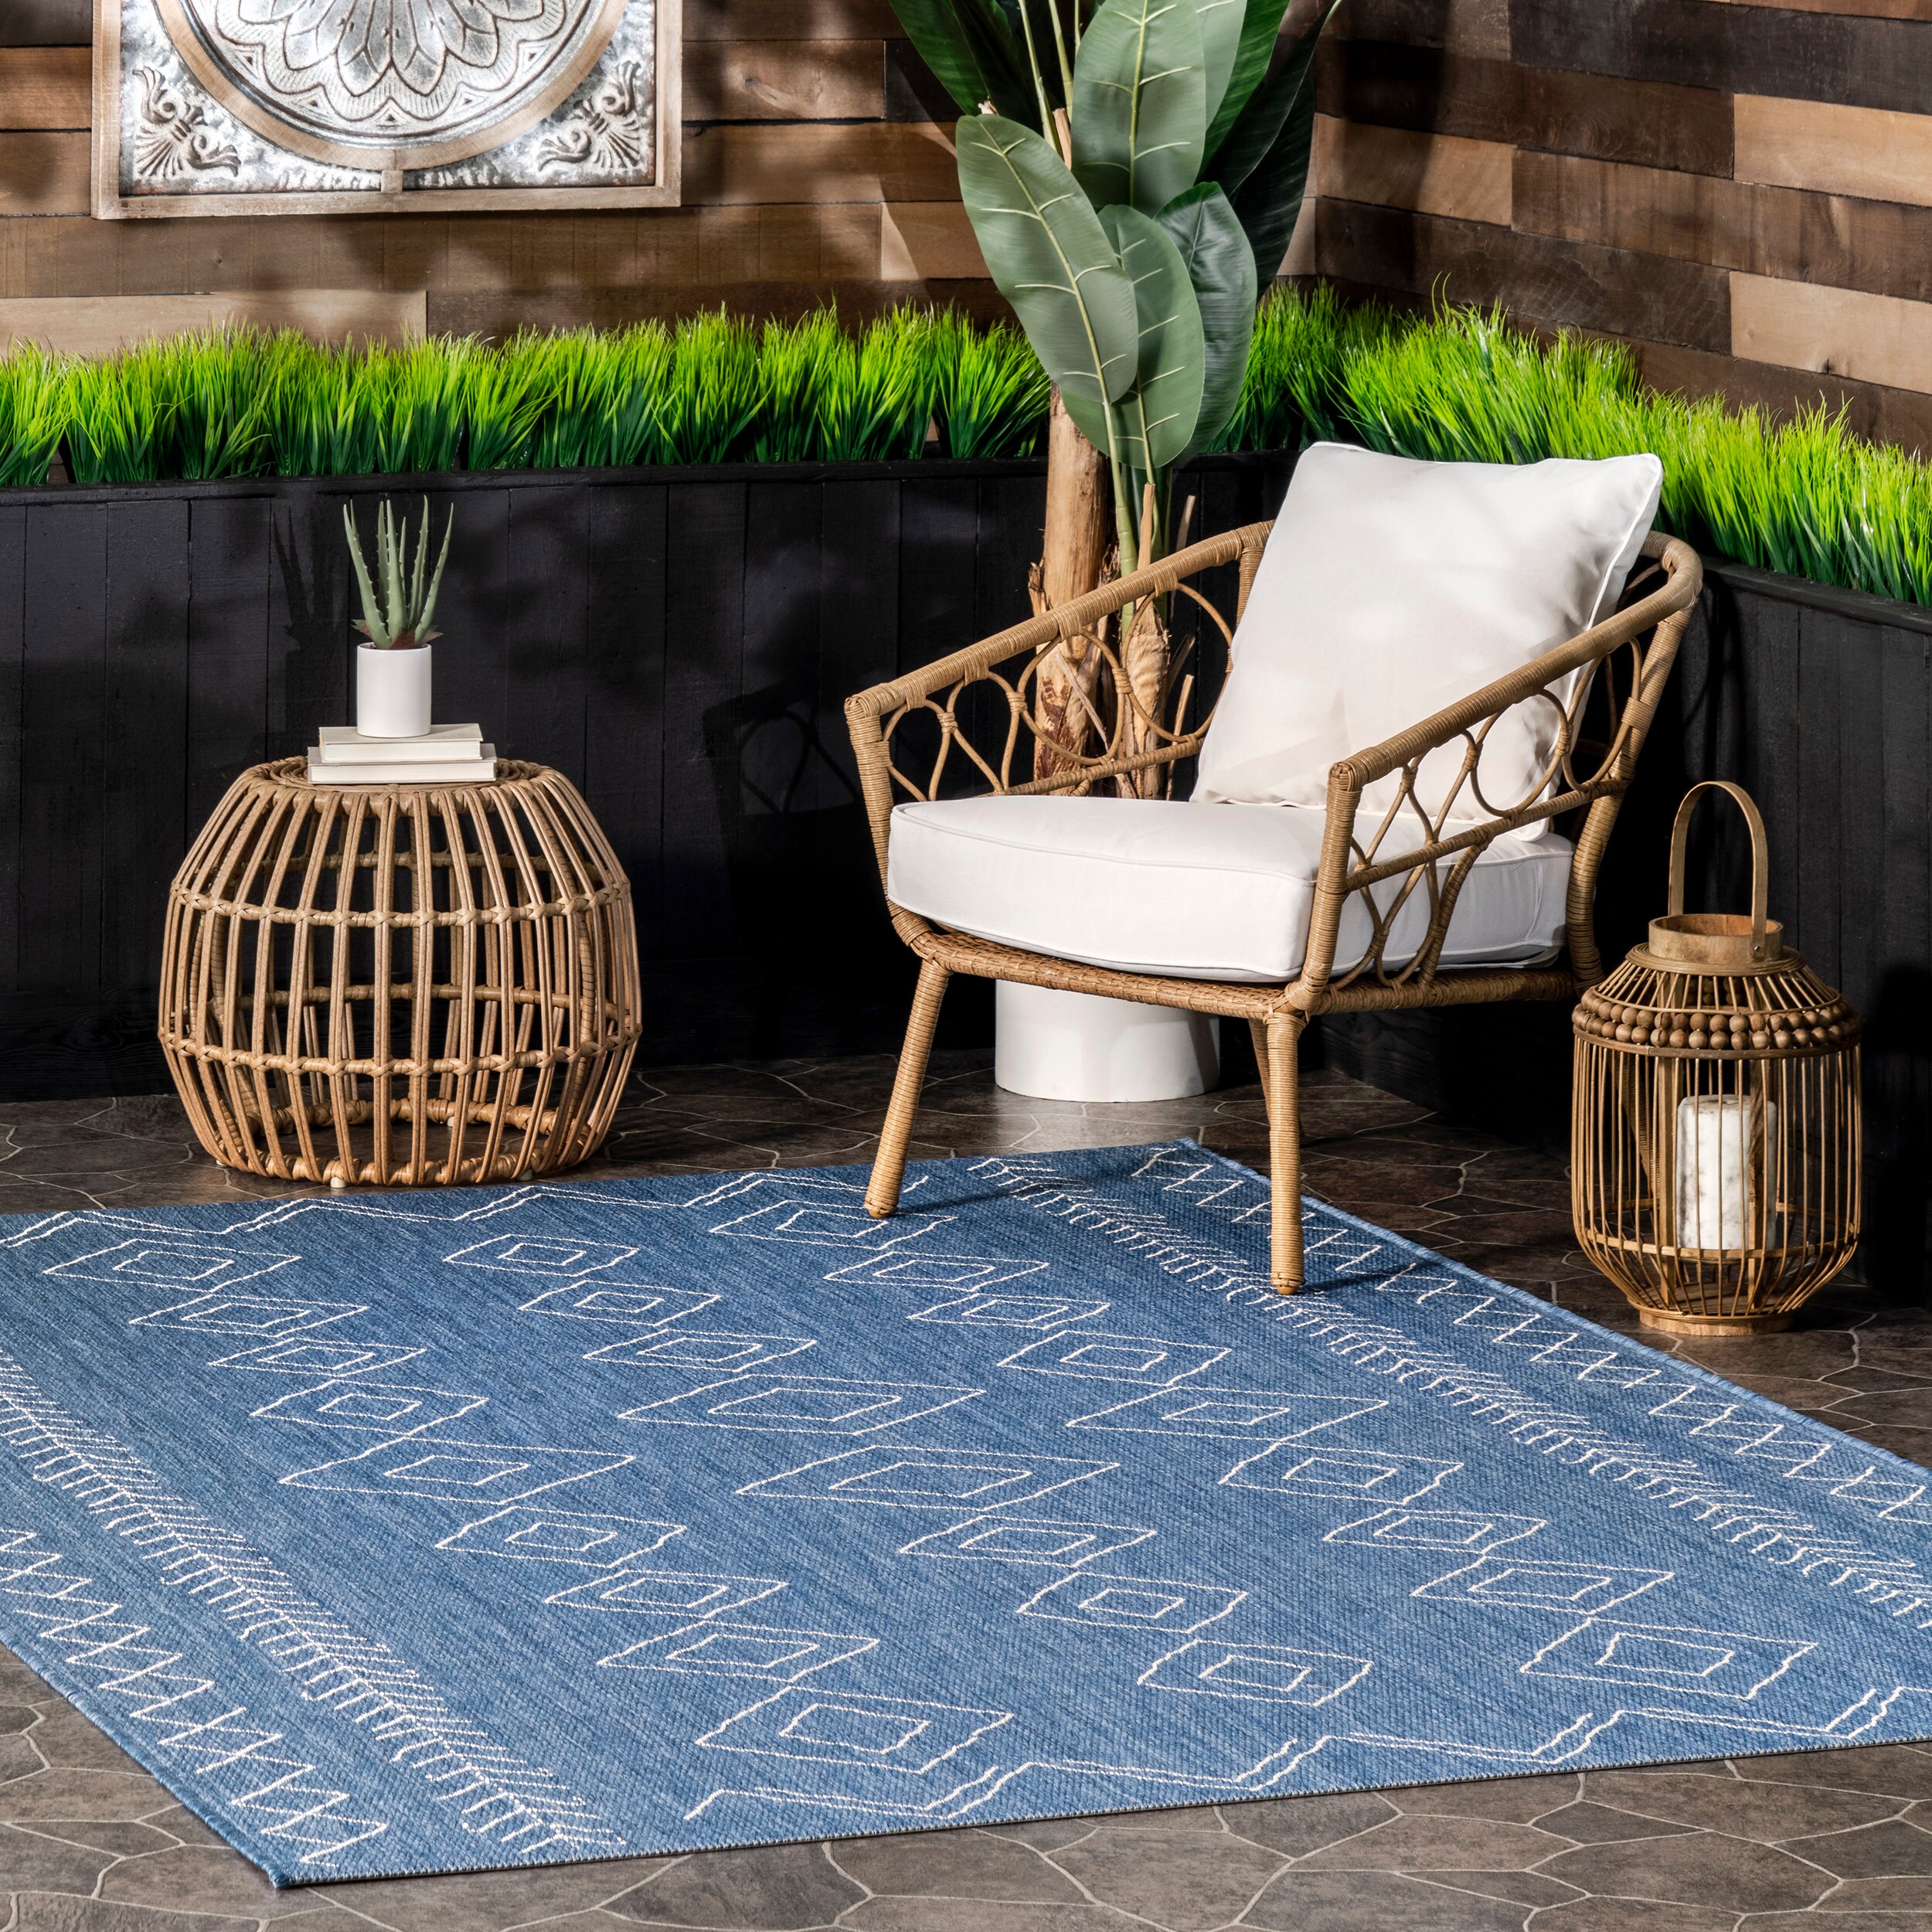 0.04'' Thick Indoor Non Slip Rug Pad